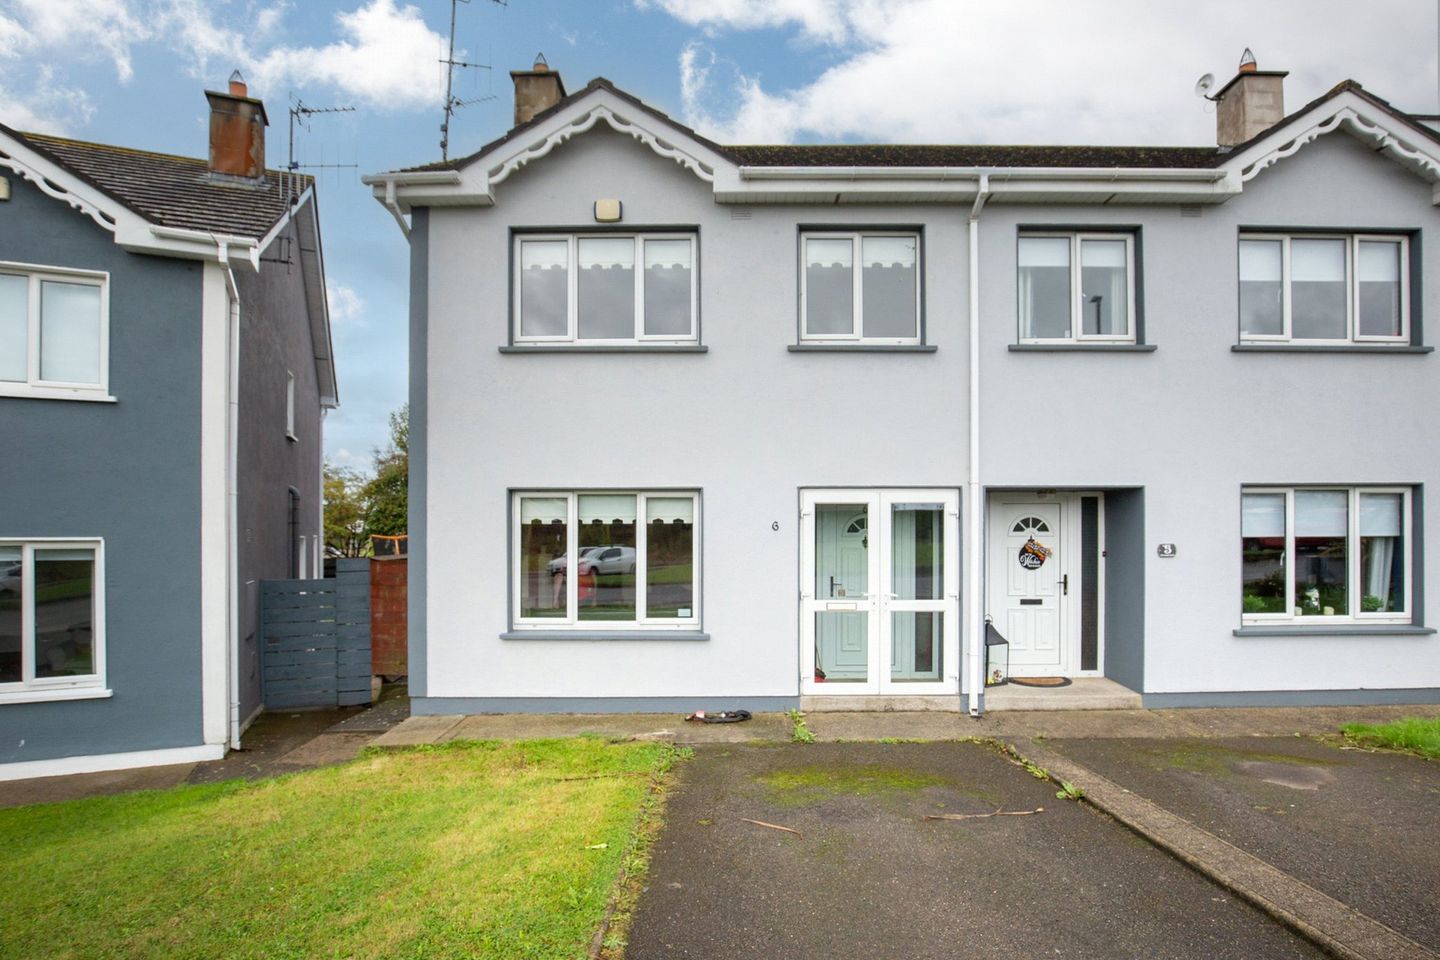 6 Beechwood Avenue, Mauritiustown, Rosslare Strand, Co. Wexford, Y35TY27